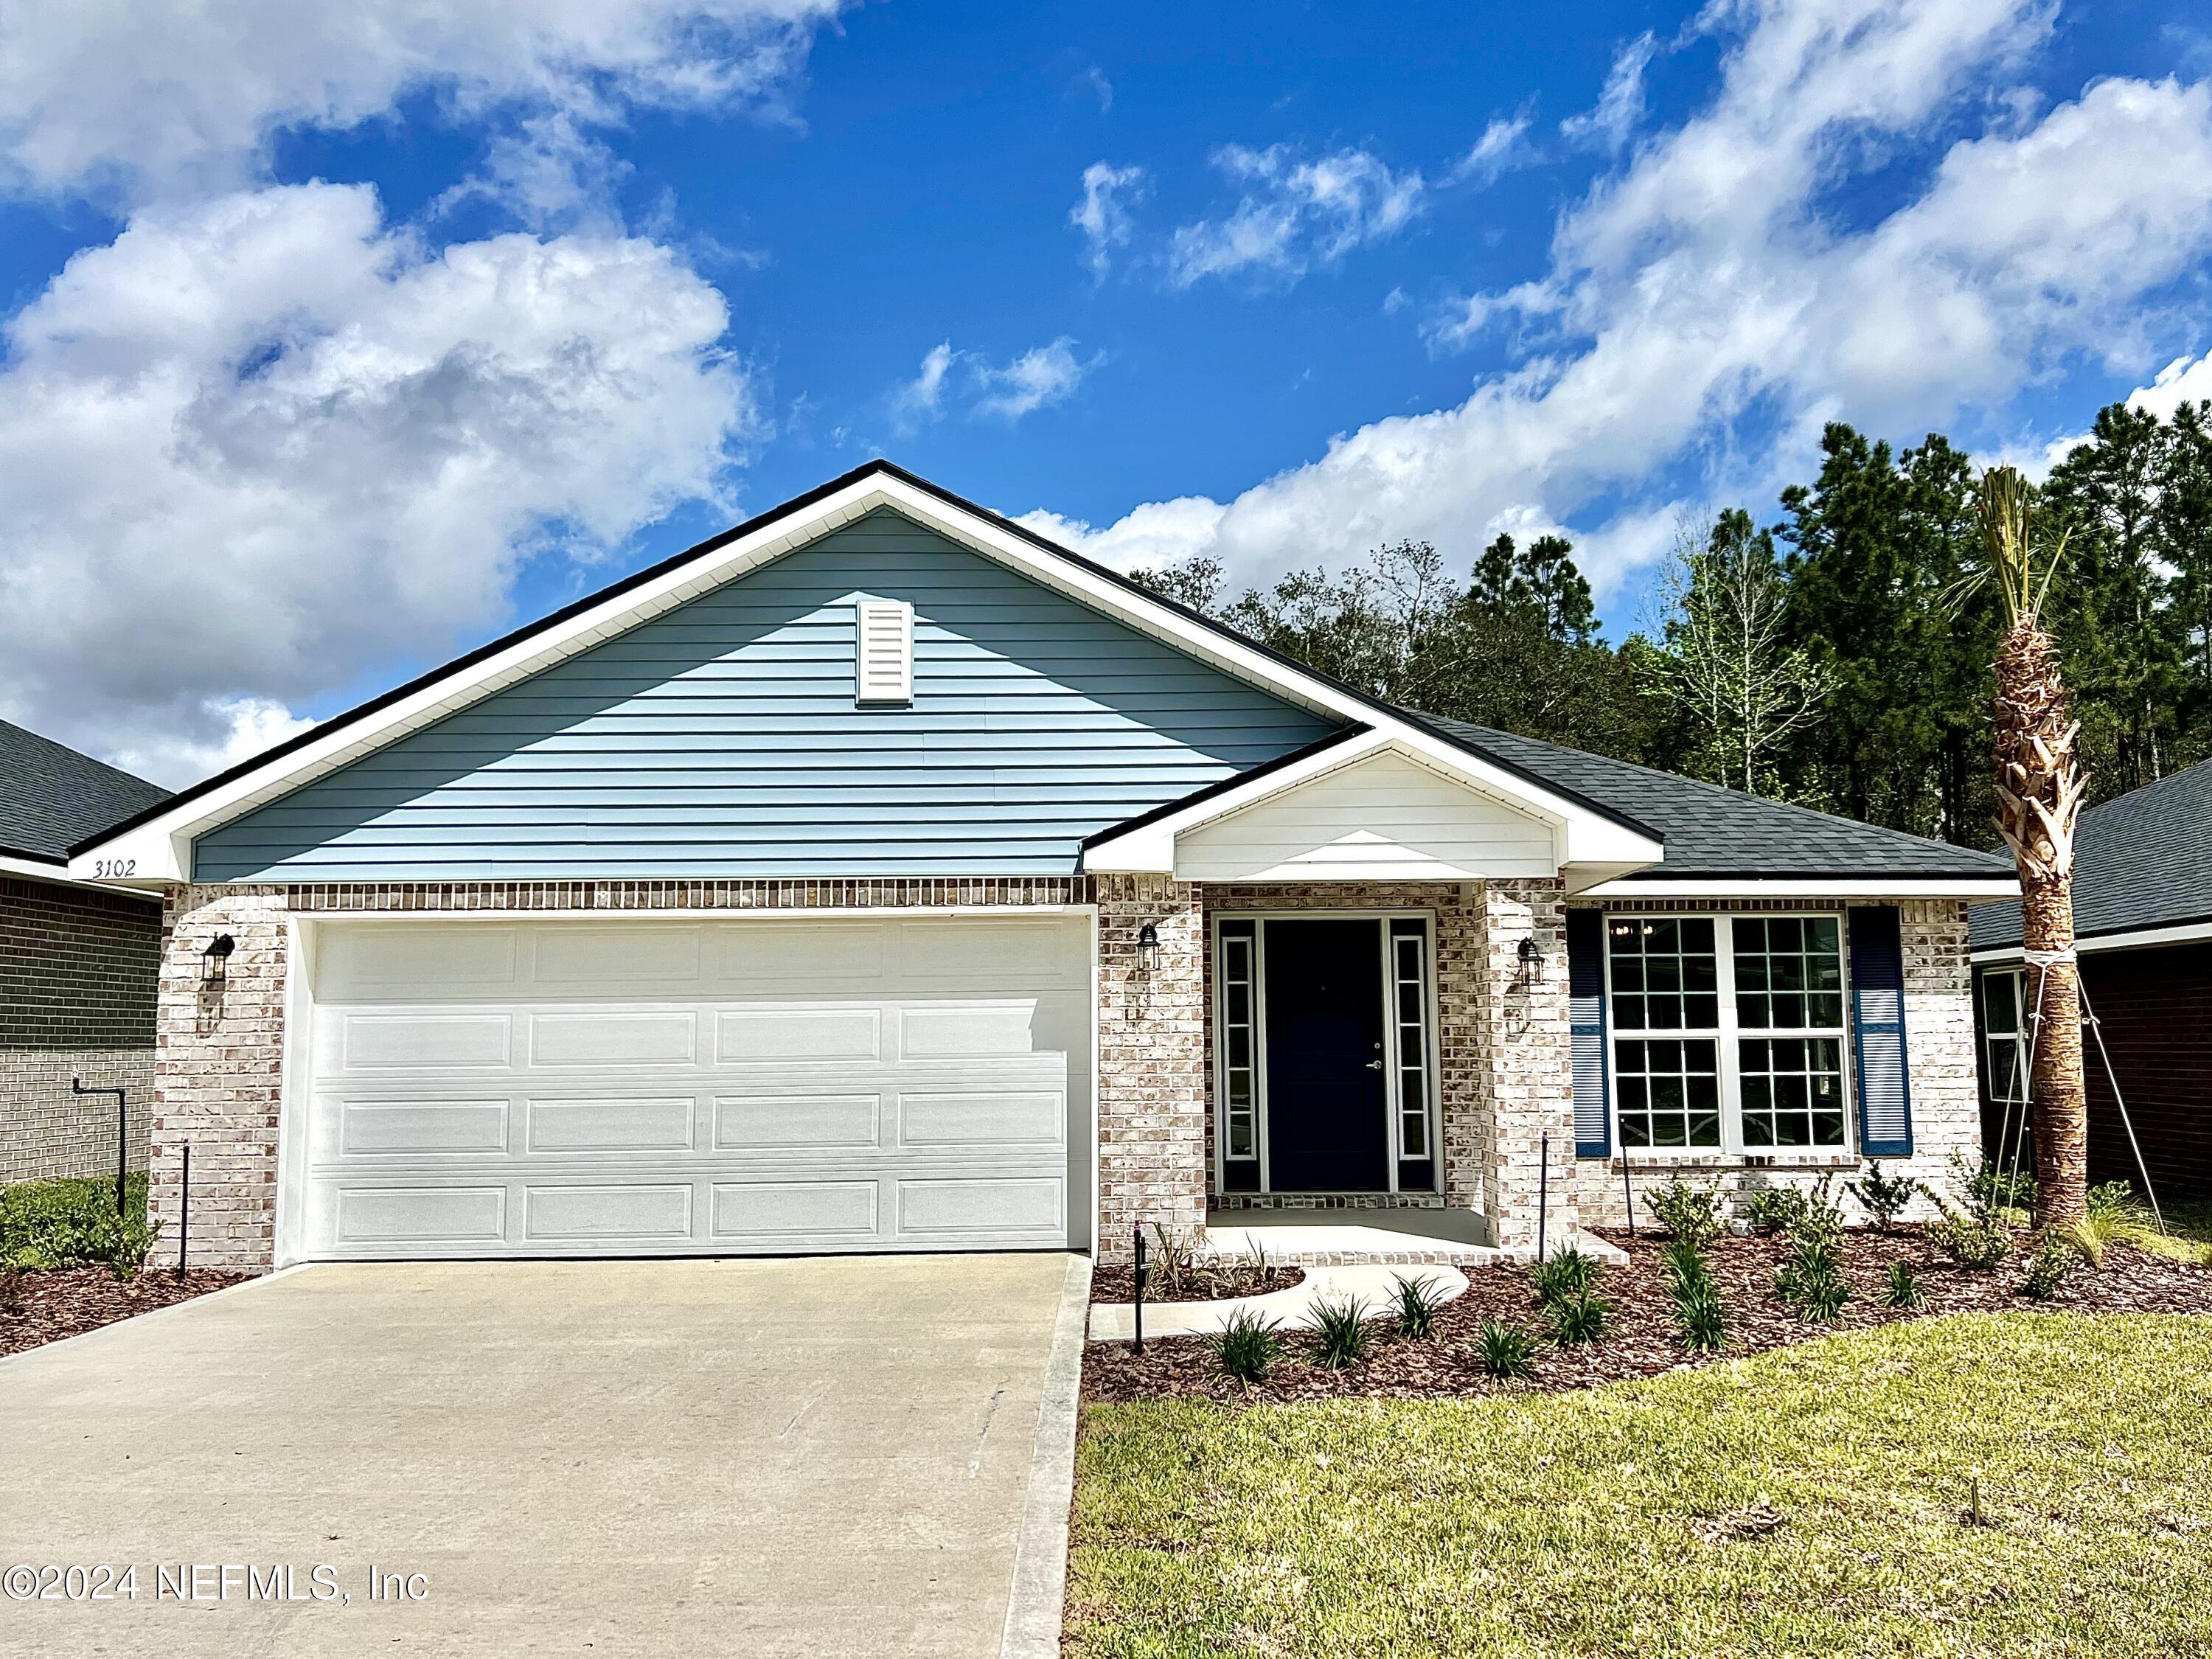 Green Cove Springs, FL home for sale located at 3102 Laurel Springs Drive, Green Cove Springs, FL 32043